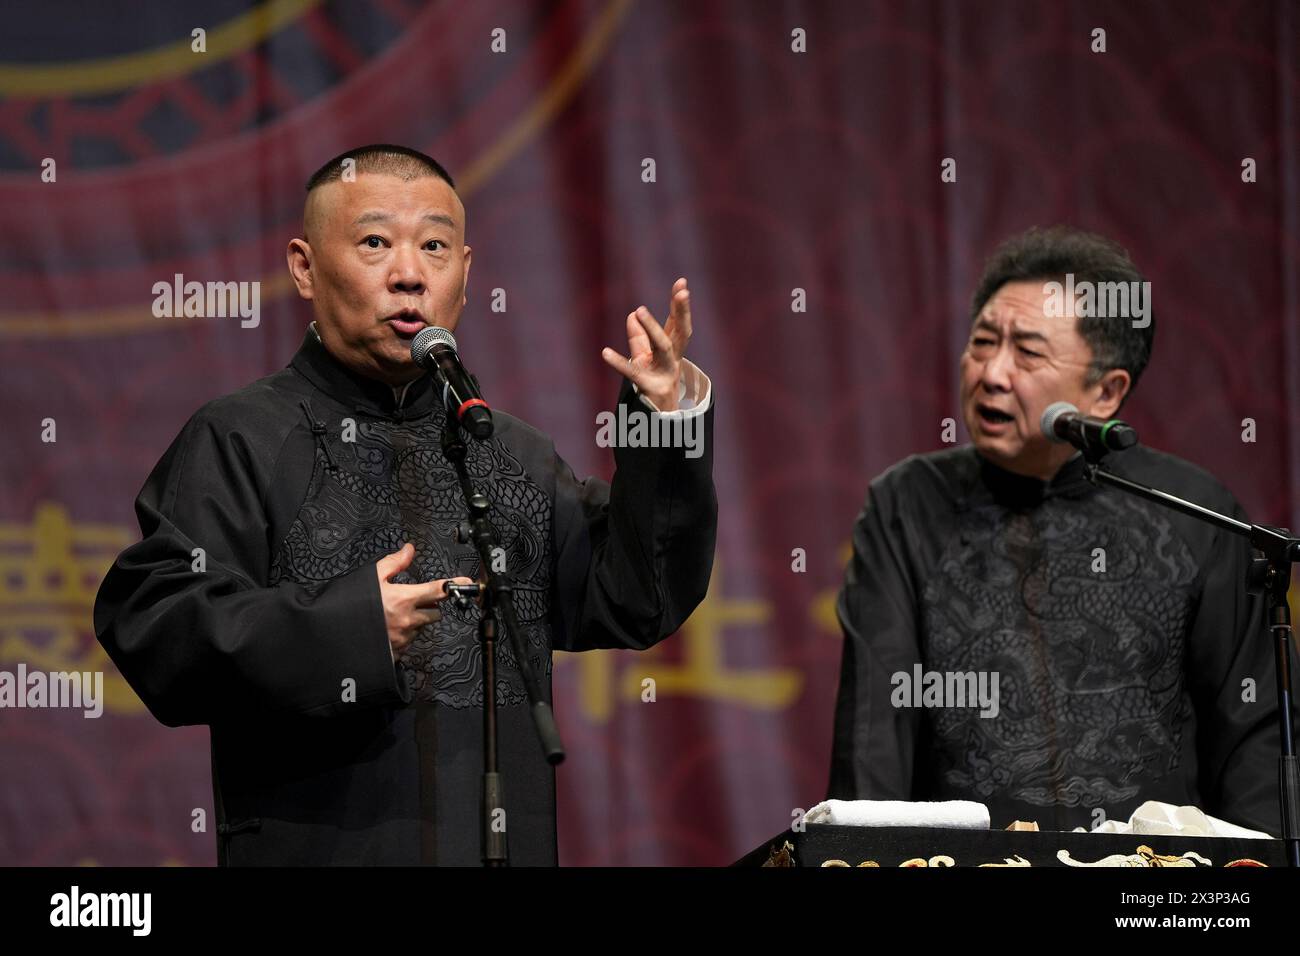 (240428) -- LONDON, April 28, 2024 (Xinhua) -- Guo Degang (L) and Yu Qian perform Xiangsheng, or crosstalk comedy in London, Britain, April 27, 2024.  Thunderous laughter and applause almost blew off the roof of an auditorium in London's ExCeL Exhibition Centre on Saturday night, when a punchline by Guo Degang, a popular Chinese traditional crosstalk comedian, landed with an audience of thousands.   Along with Guo and his partner Yu Qian, a handful of comedians from the De Yun She Performance Group performed Xiangsheng, or crosstalk comedy, with both jokes about life anecdotes and traditional Stock Photo